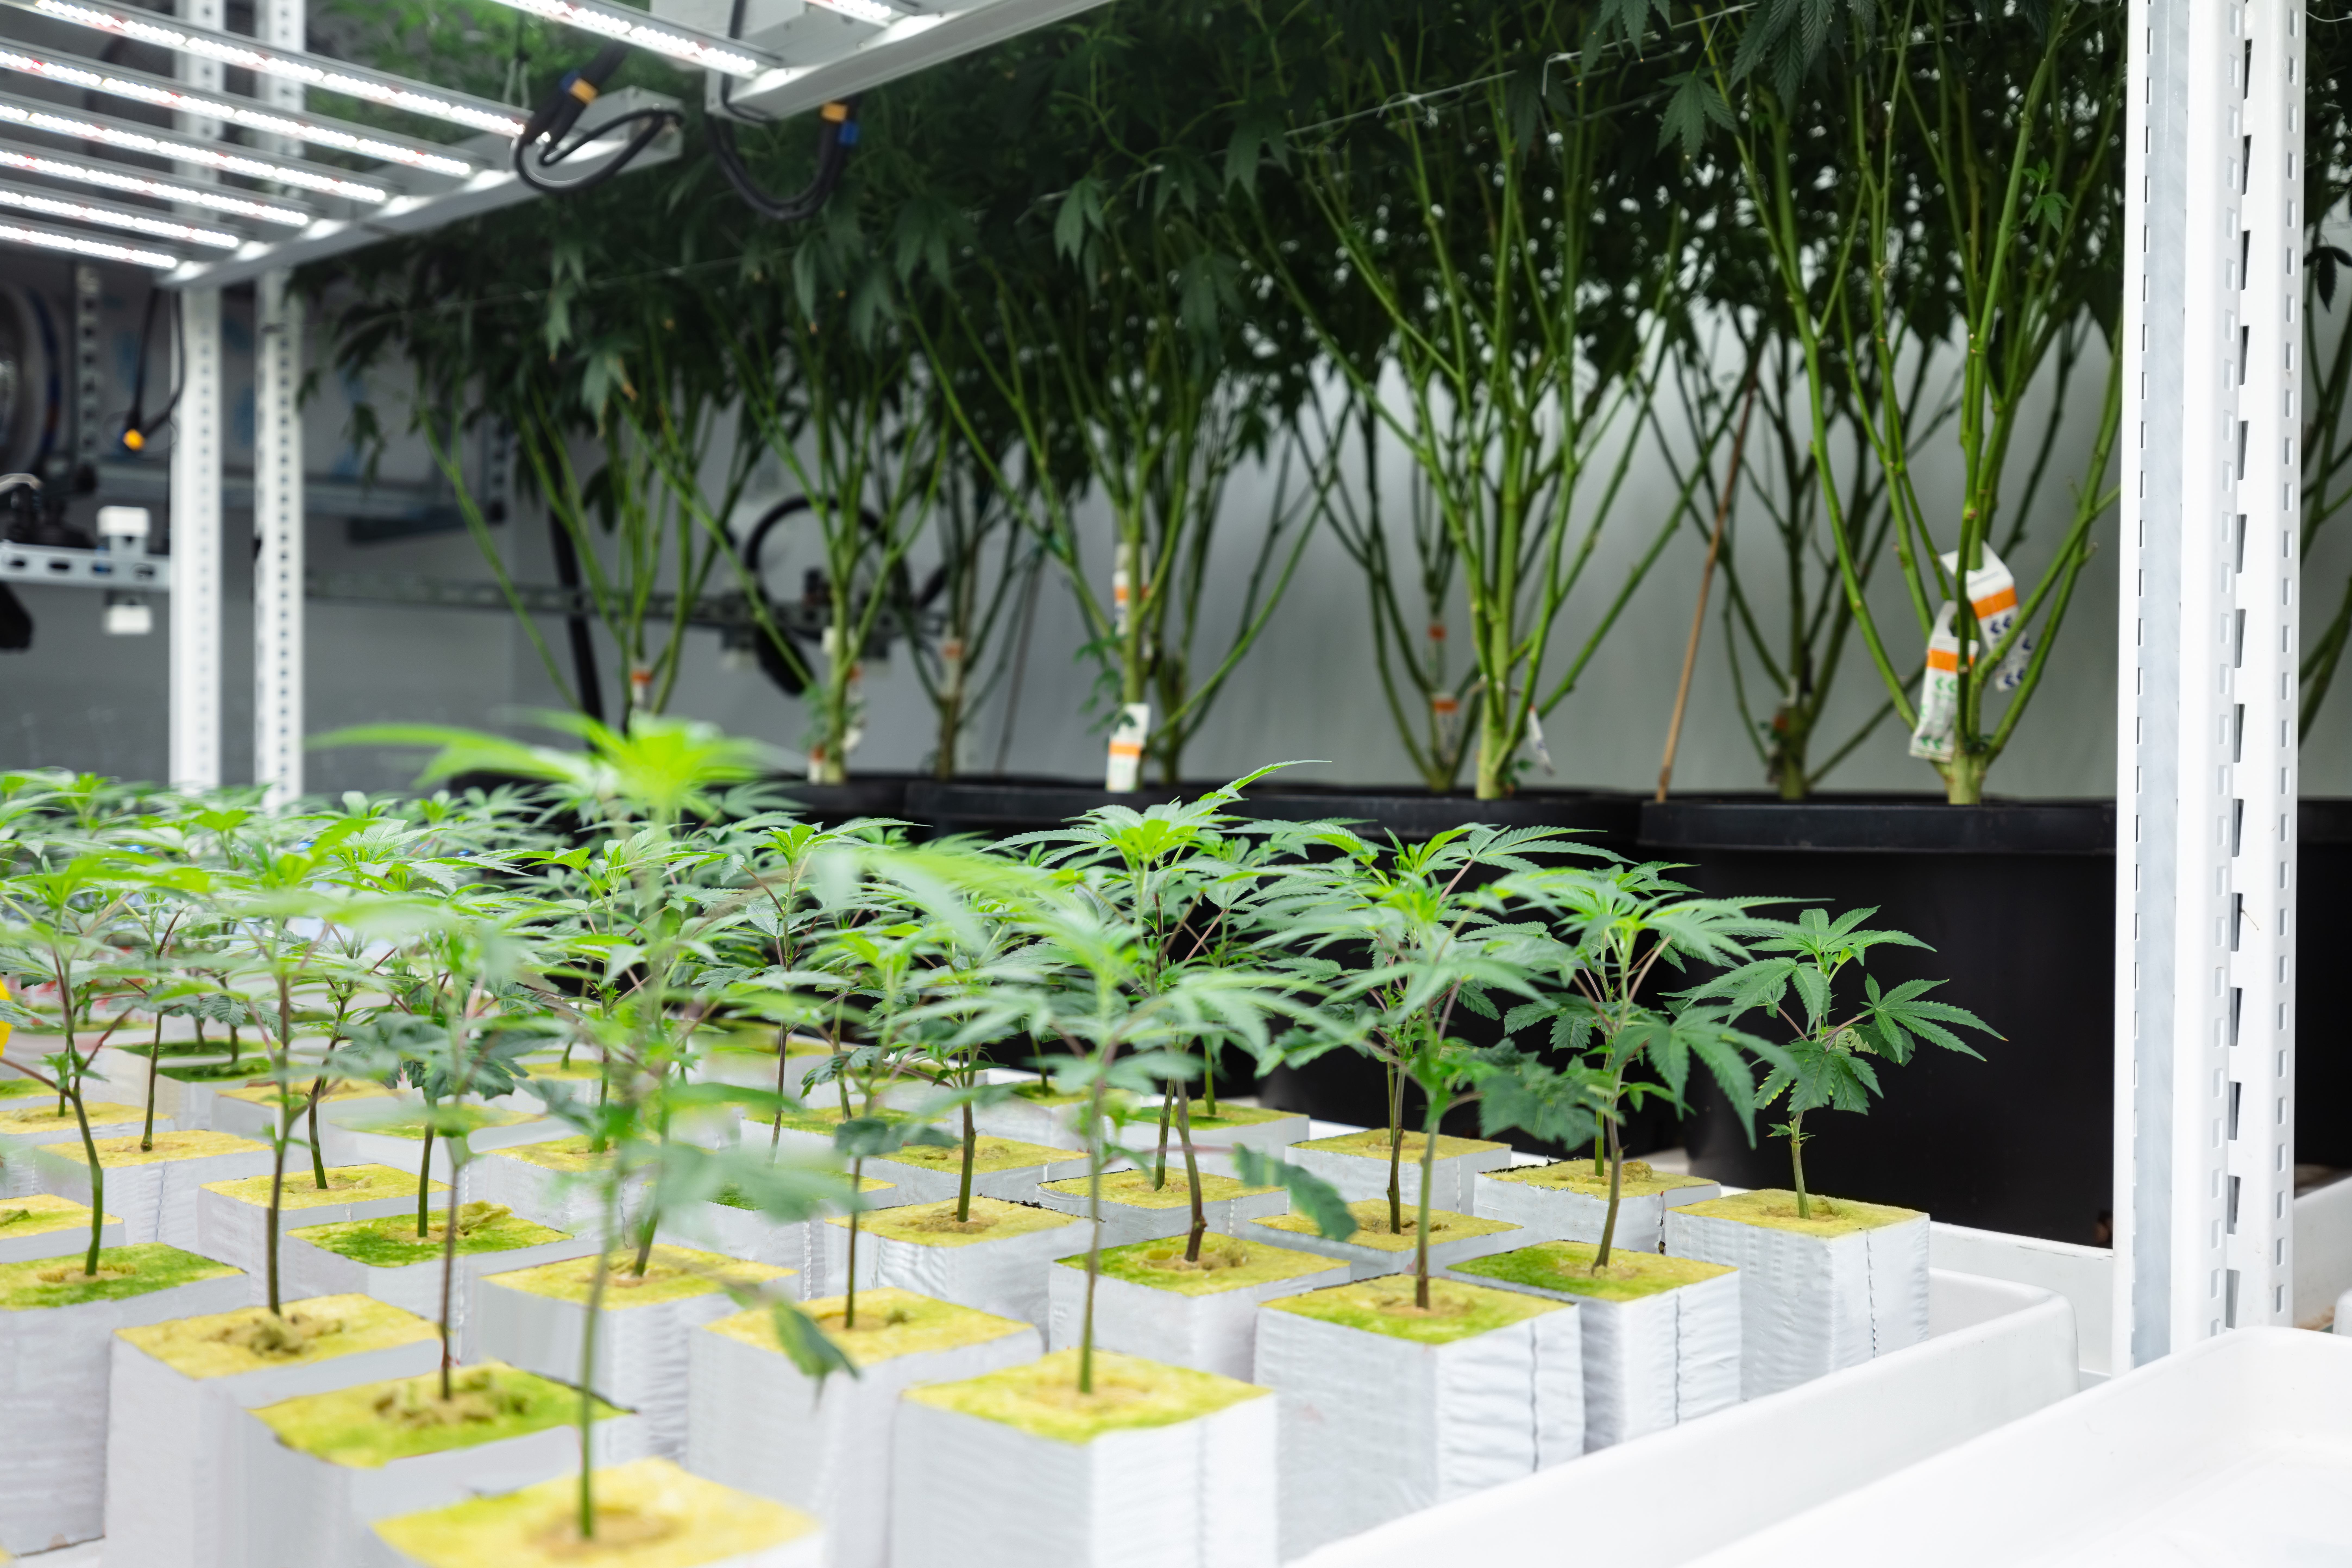 Cannabis clones sit on a table in a grow room next to larger plants.